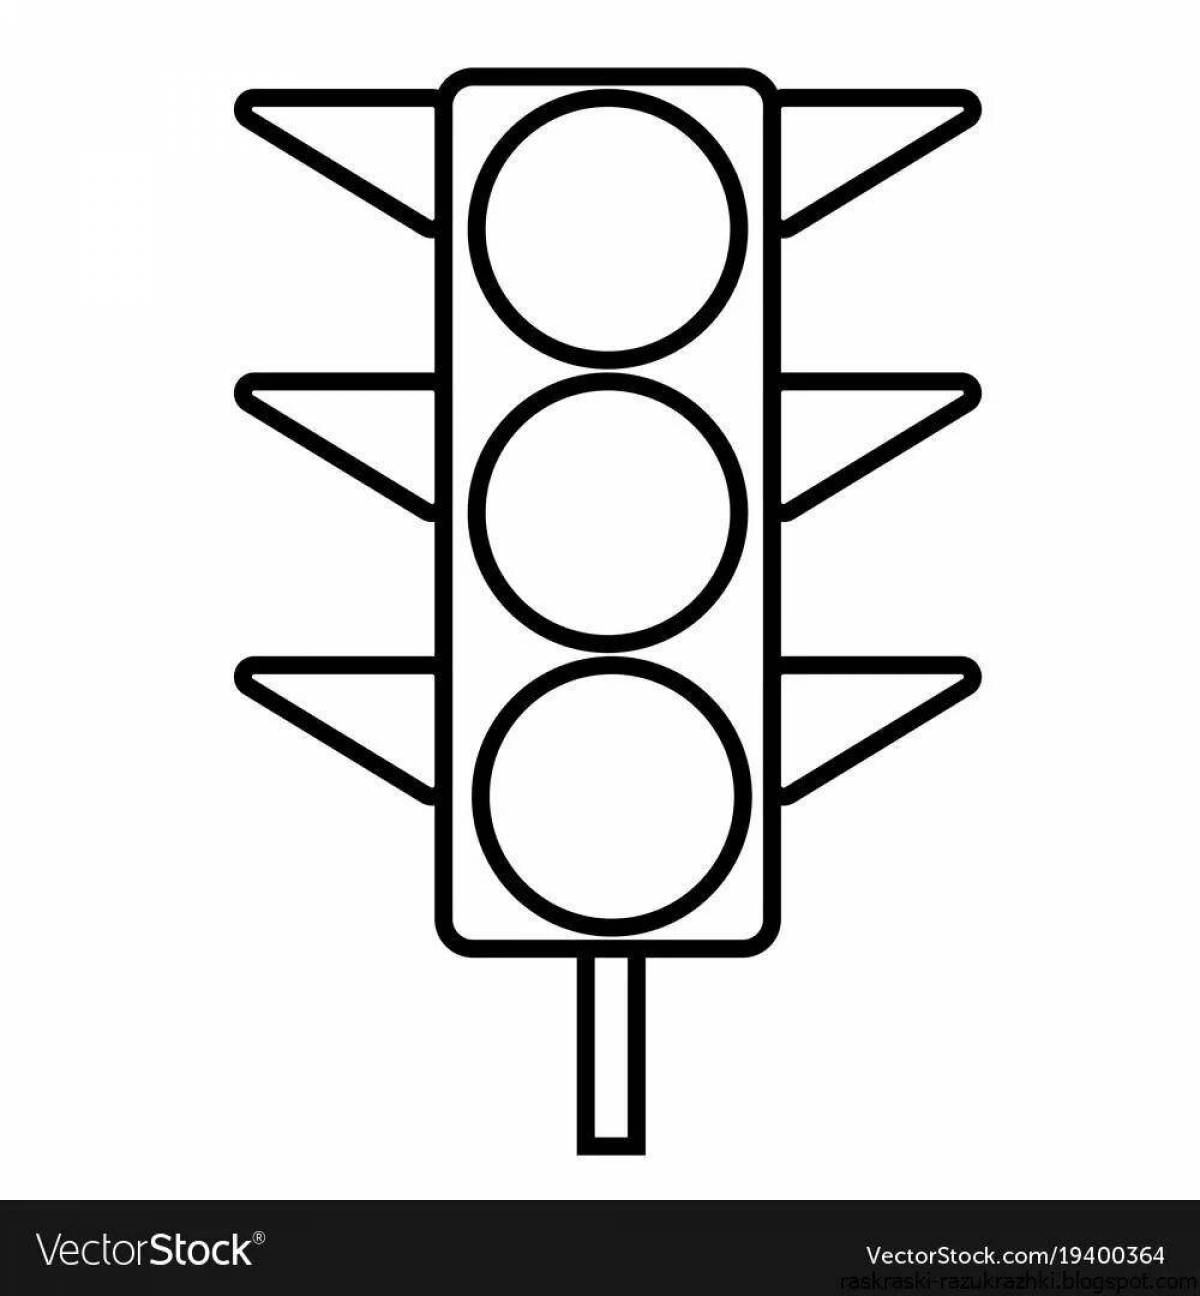 Coloring book glowing traffic light for the little ones